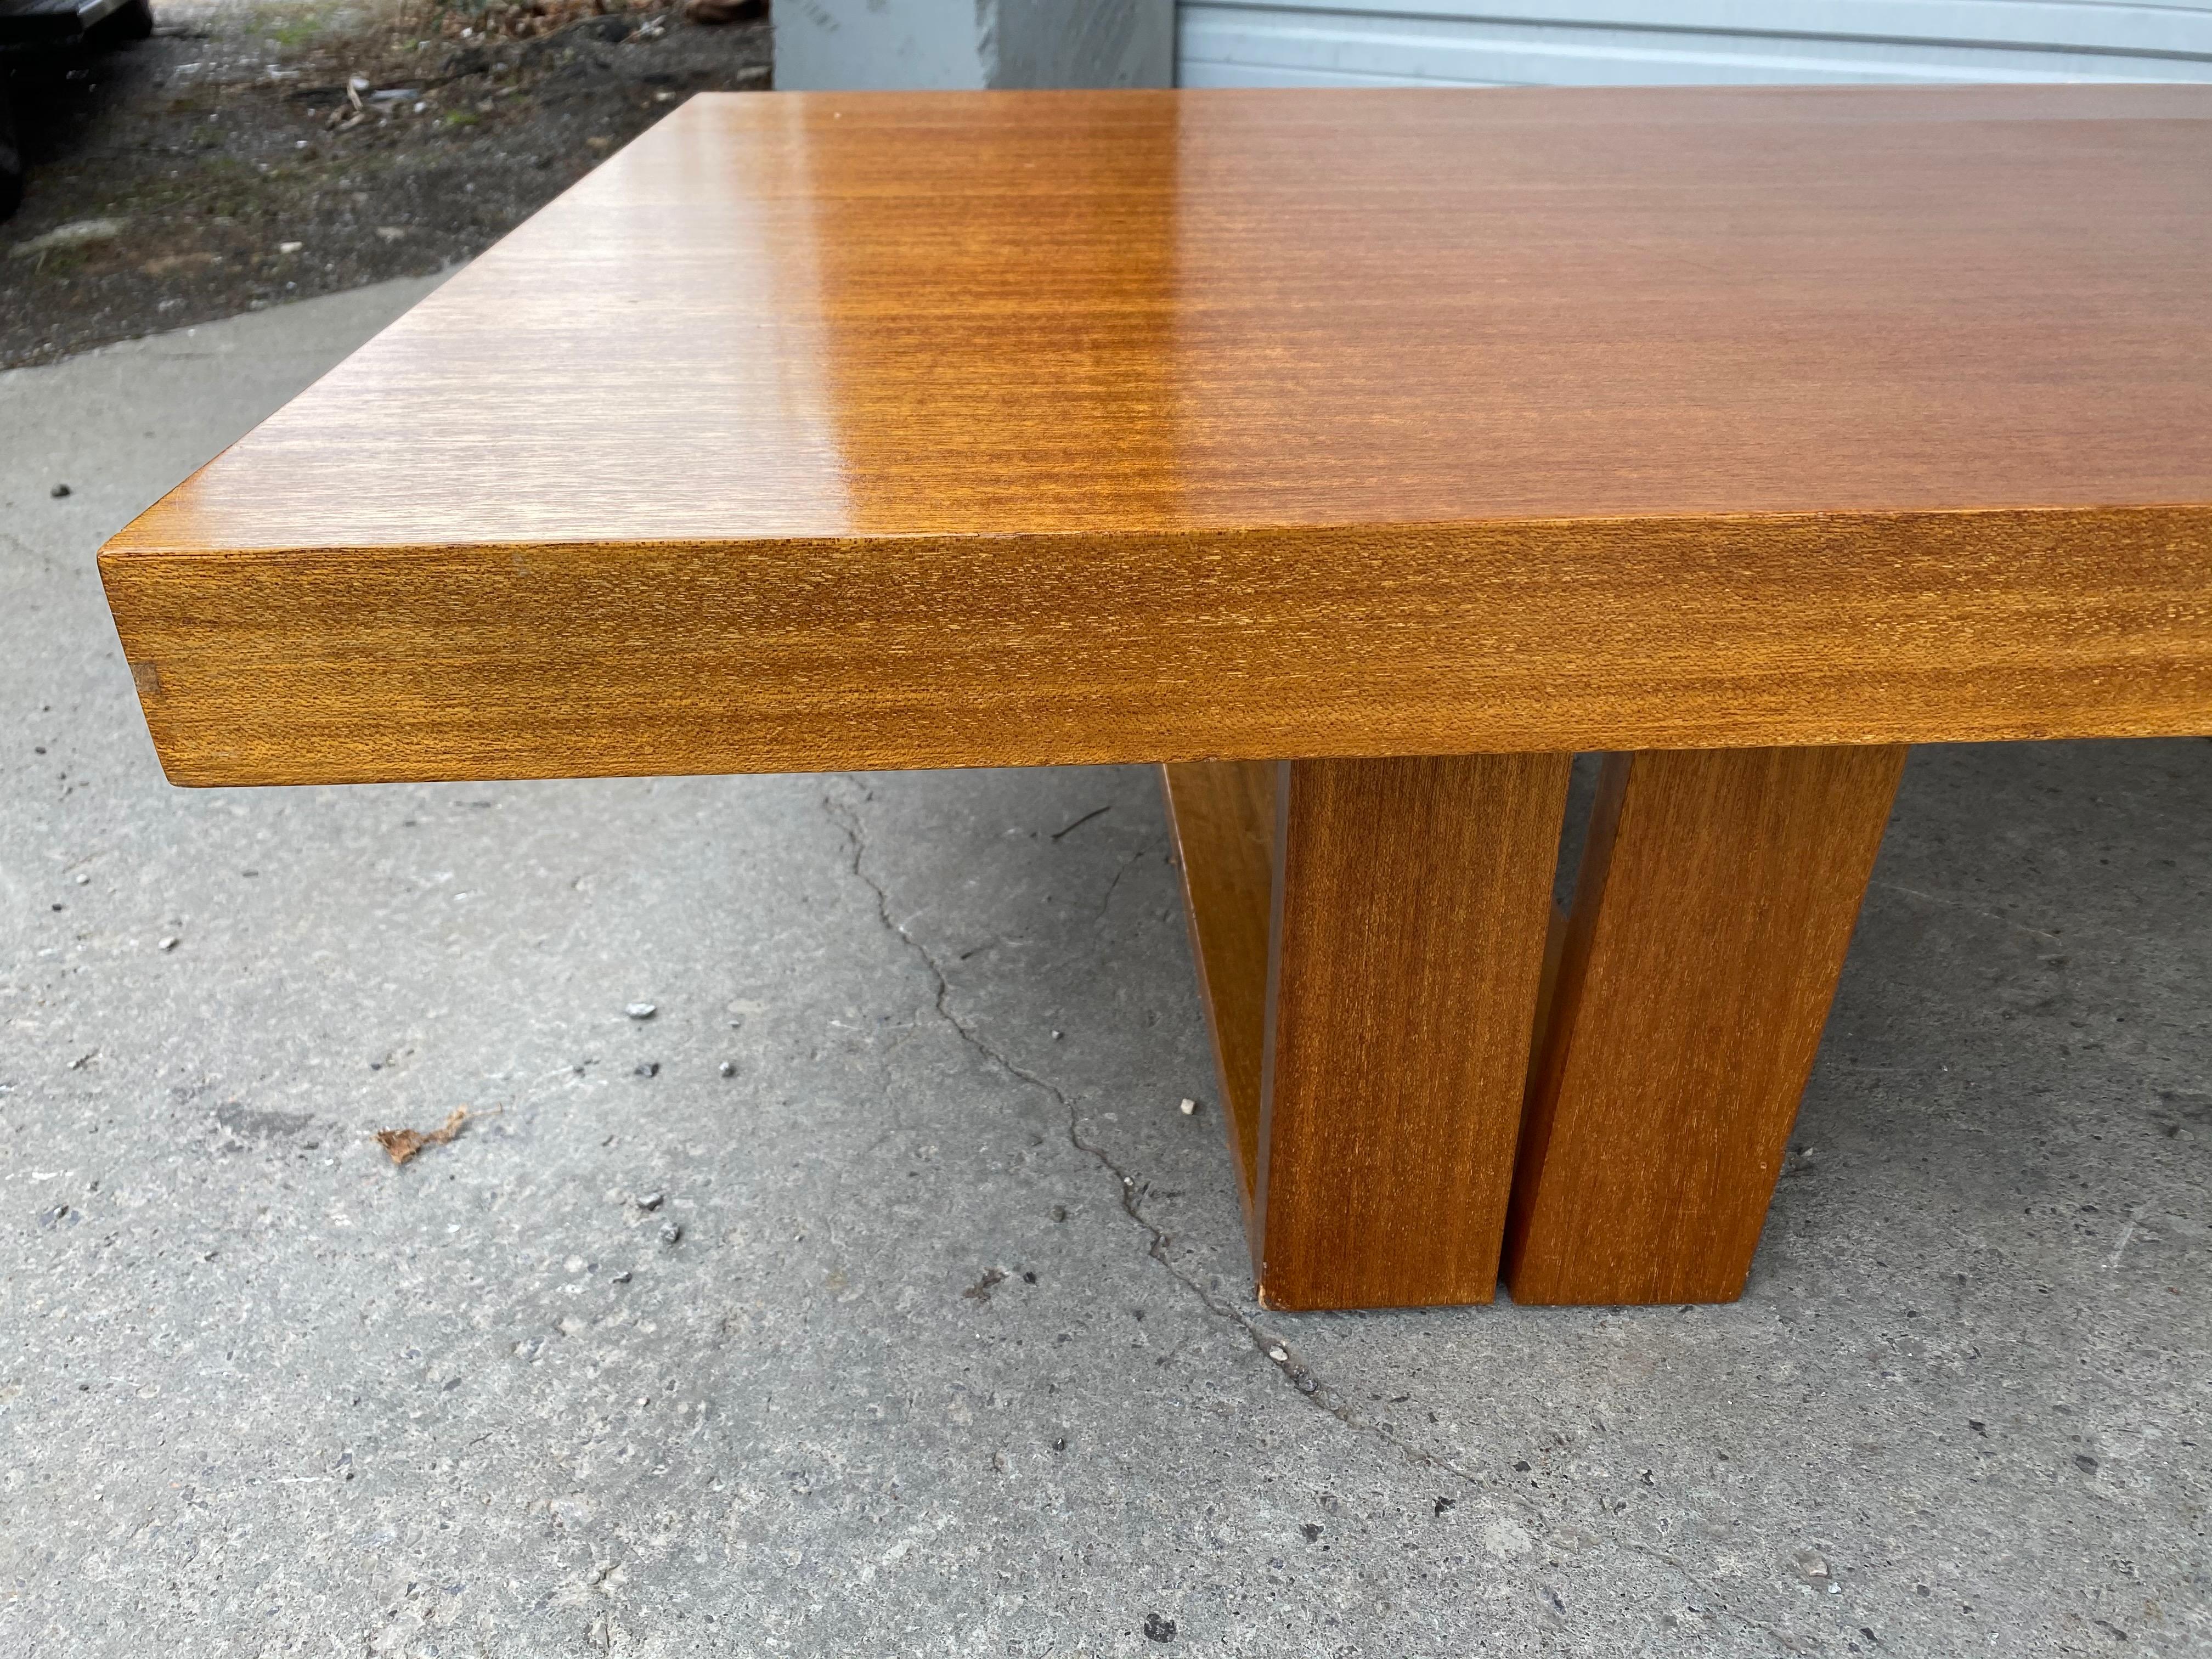 This beautiful and highly functional table designed by Hendrik Van Keppel and Taylor Green can convert from a coffee table to a dining table, work table or desk. Stunning ribbon mahogany. The ingenious design features legs which are hinged to fold